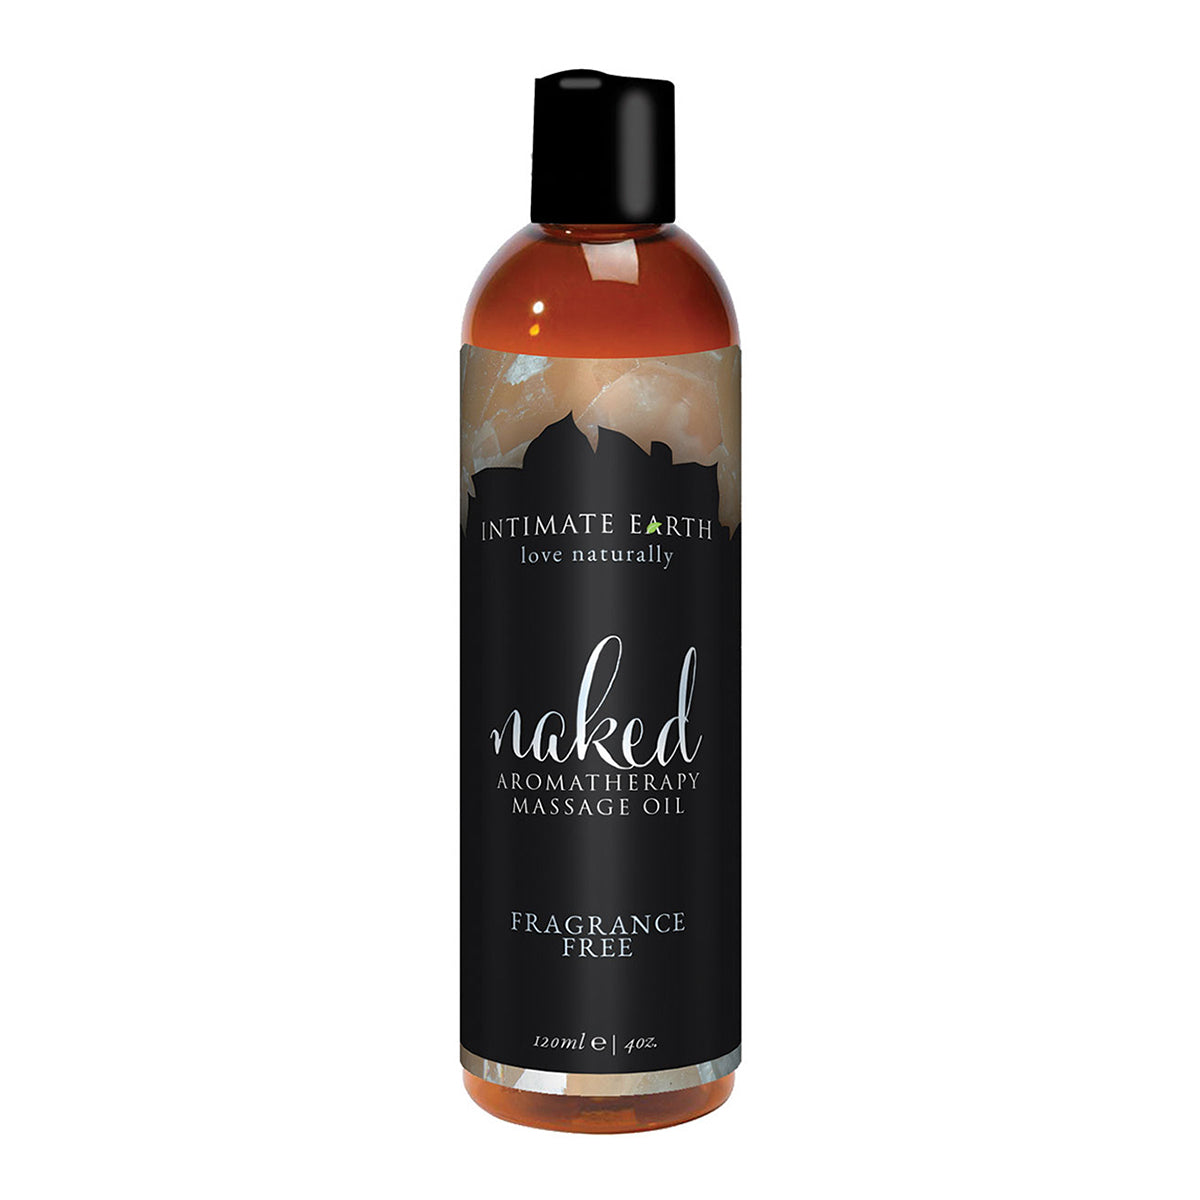 Intimate Earth Naked Fragrance Free Massage Oil